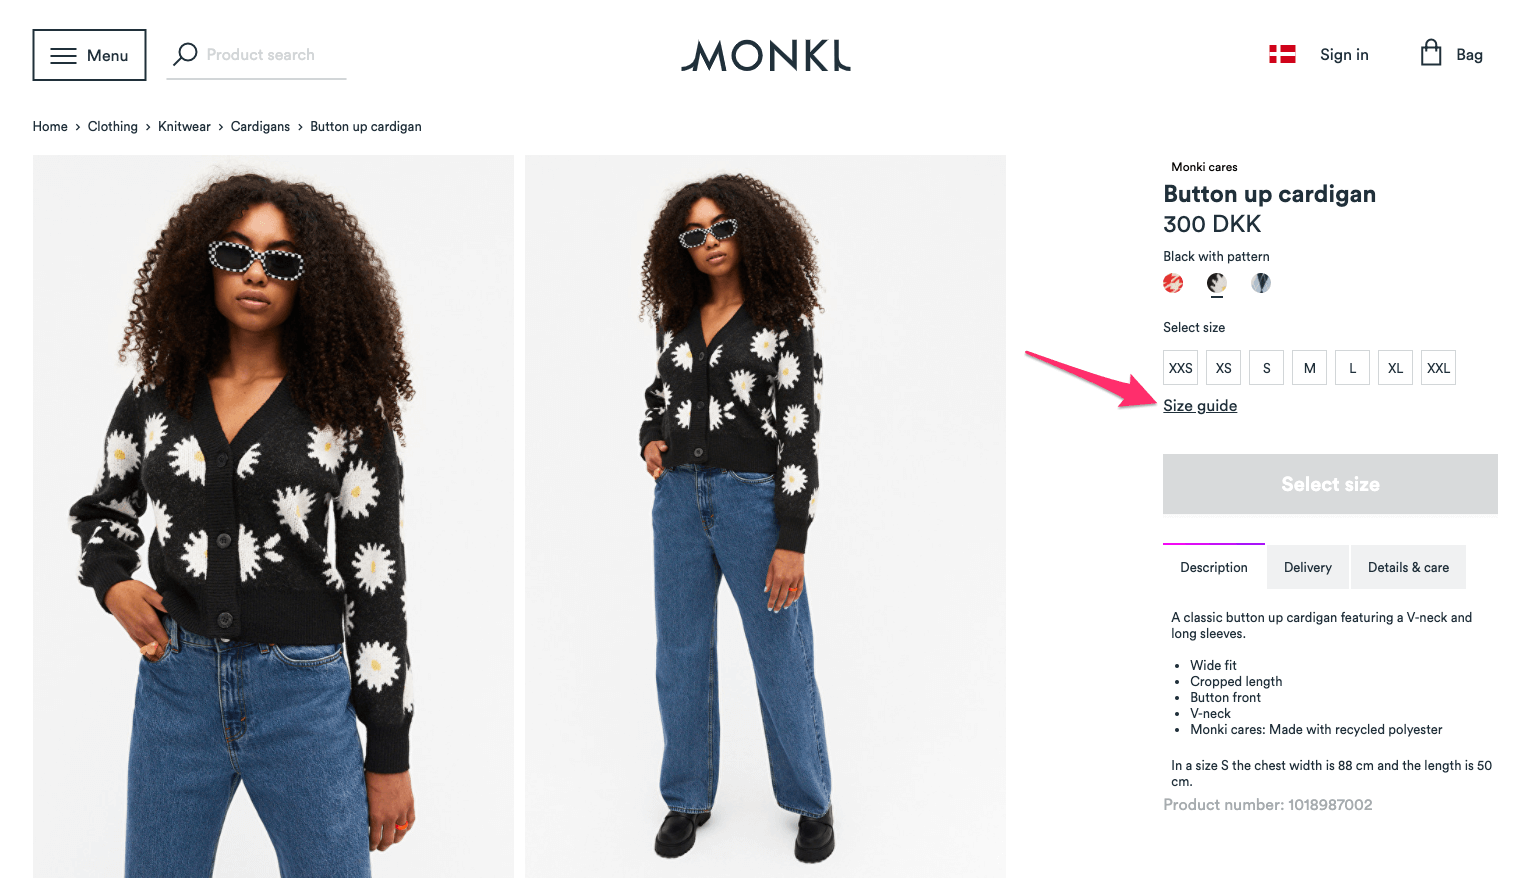 7 Outstanding E-Commerce Size Guide Examples You Can Copy